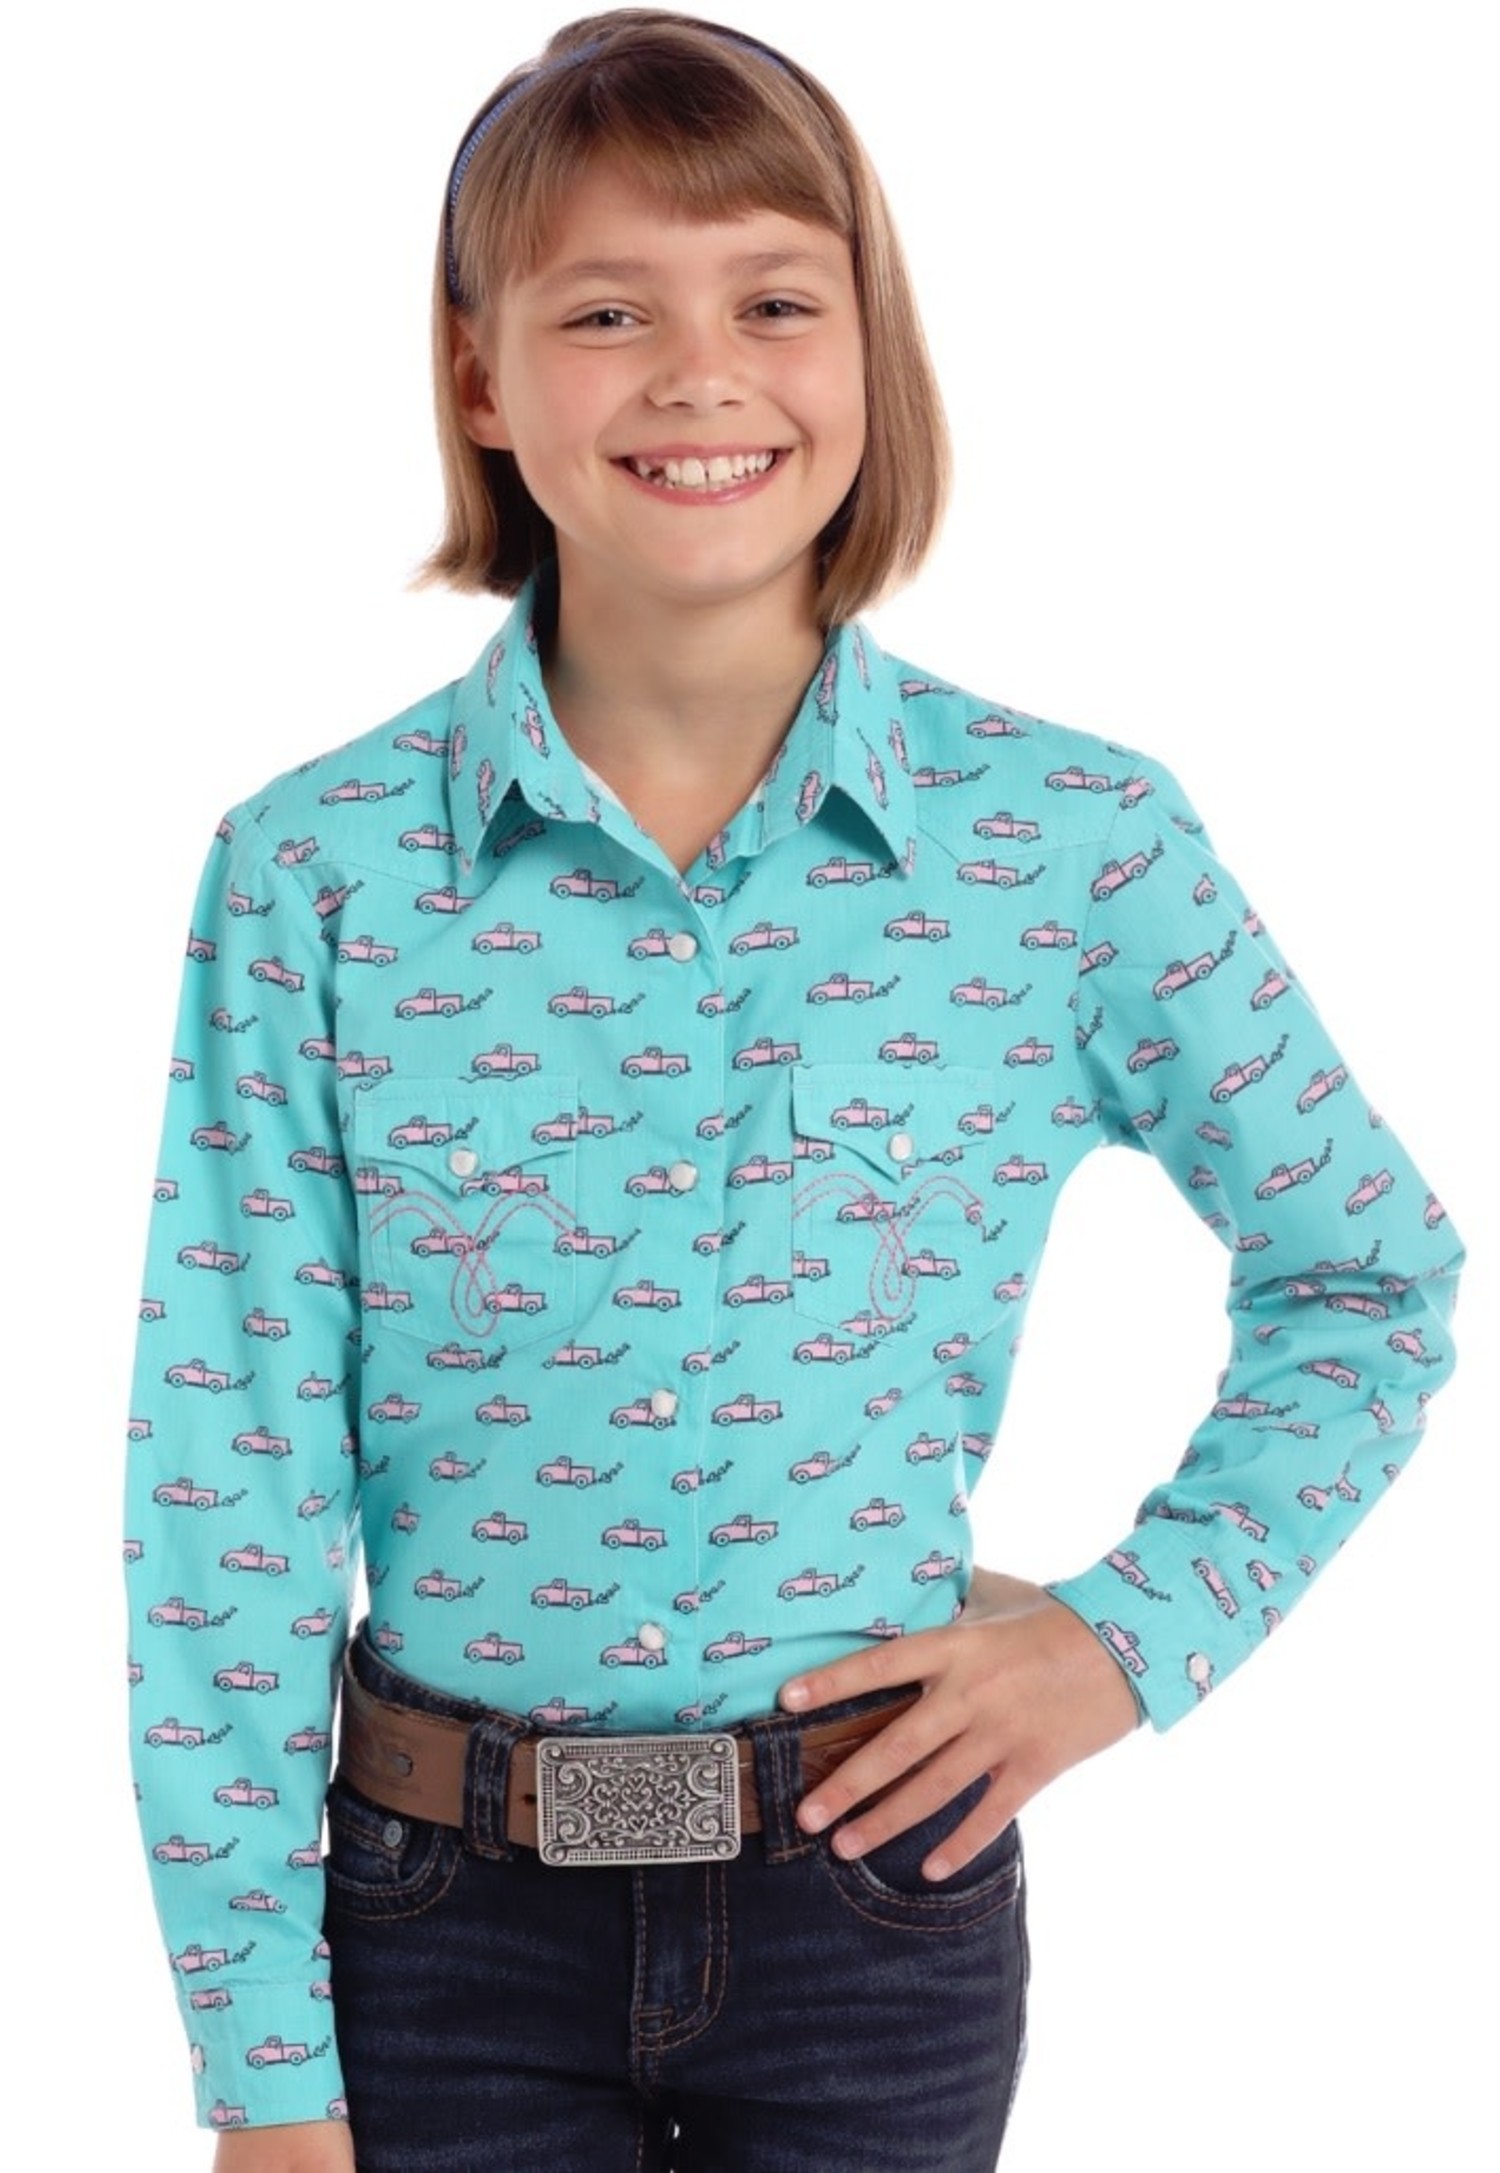 Panhandle Western Wear Girls Turquoise Print Snap Shirt - Frontier ...